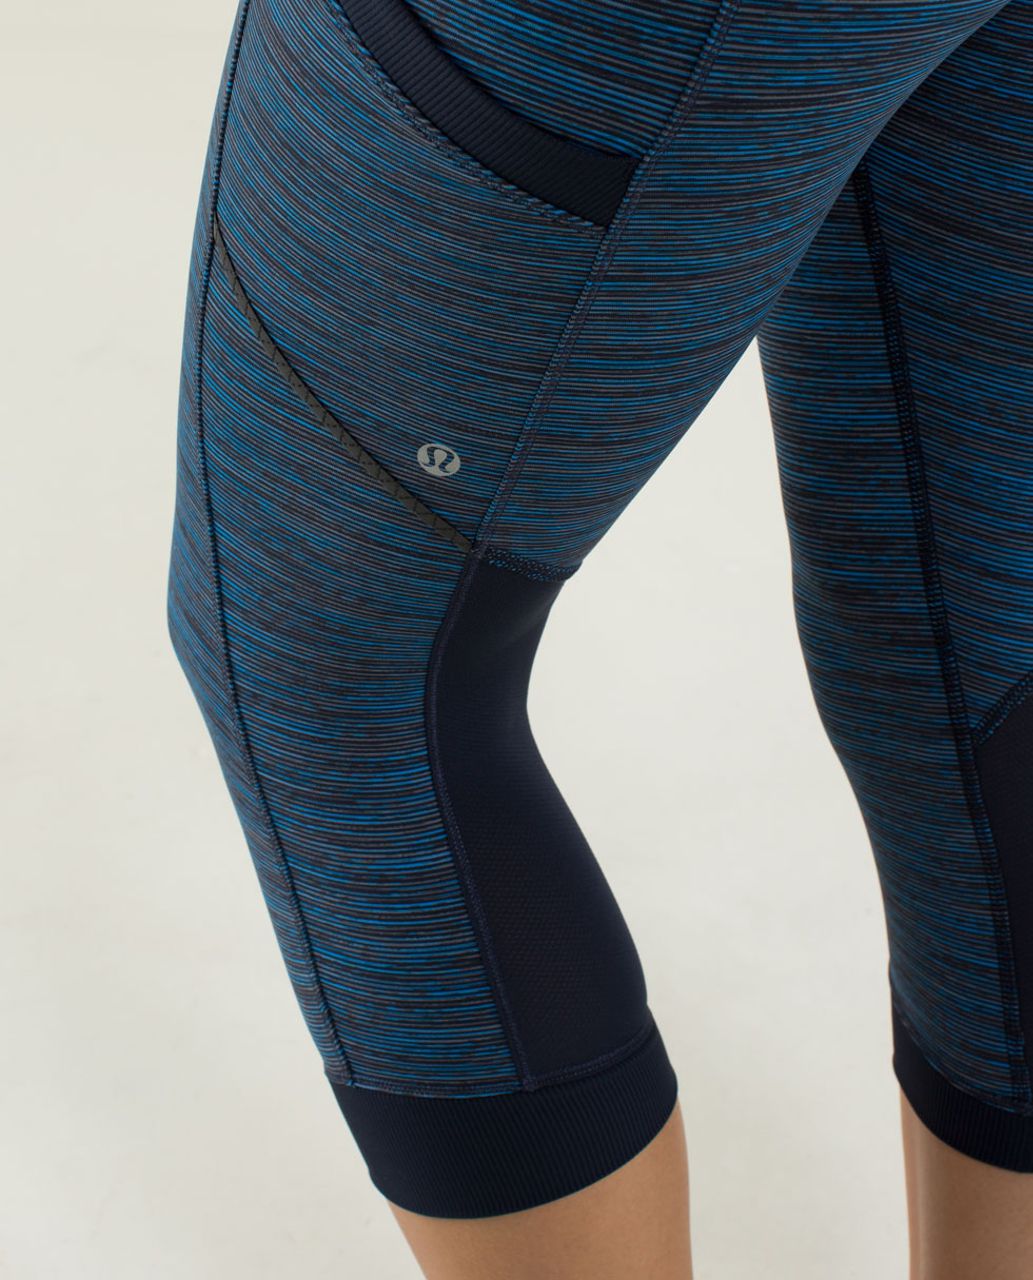 Lululemon Run For Fun Crop - Wee Are From Space October Inkwell / Inkwell